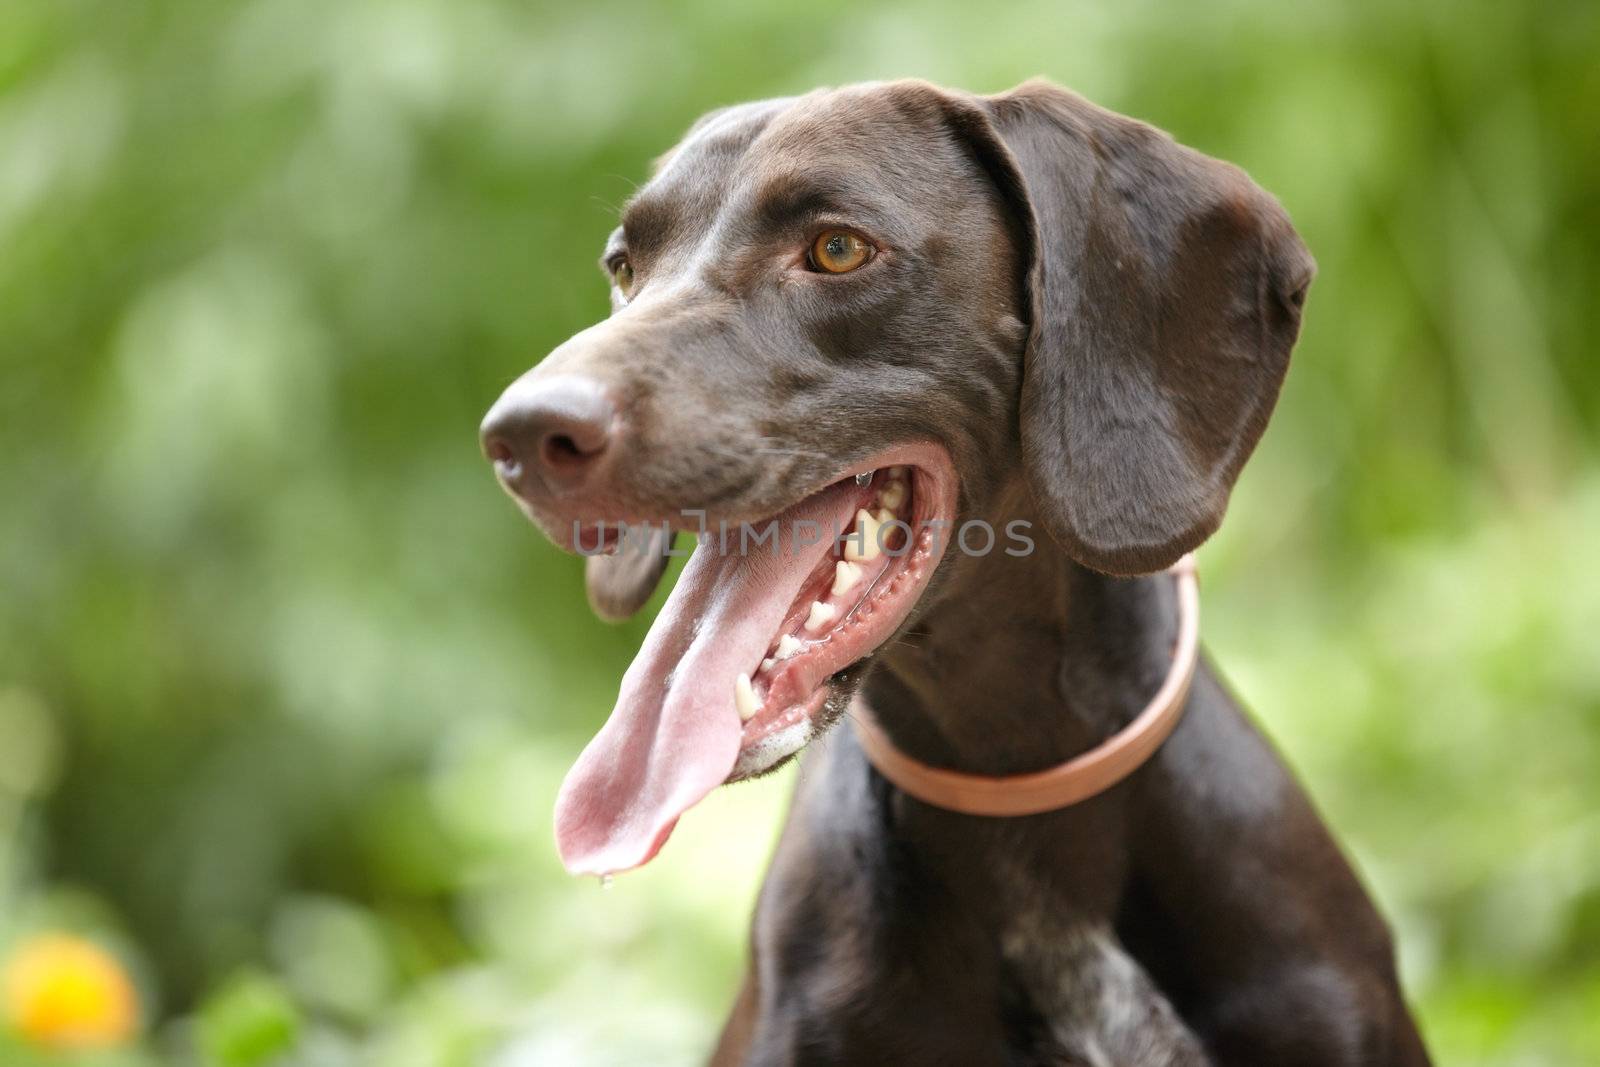 German short-haired pointer outdoors. Natural light and colors